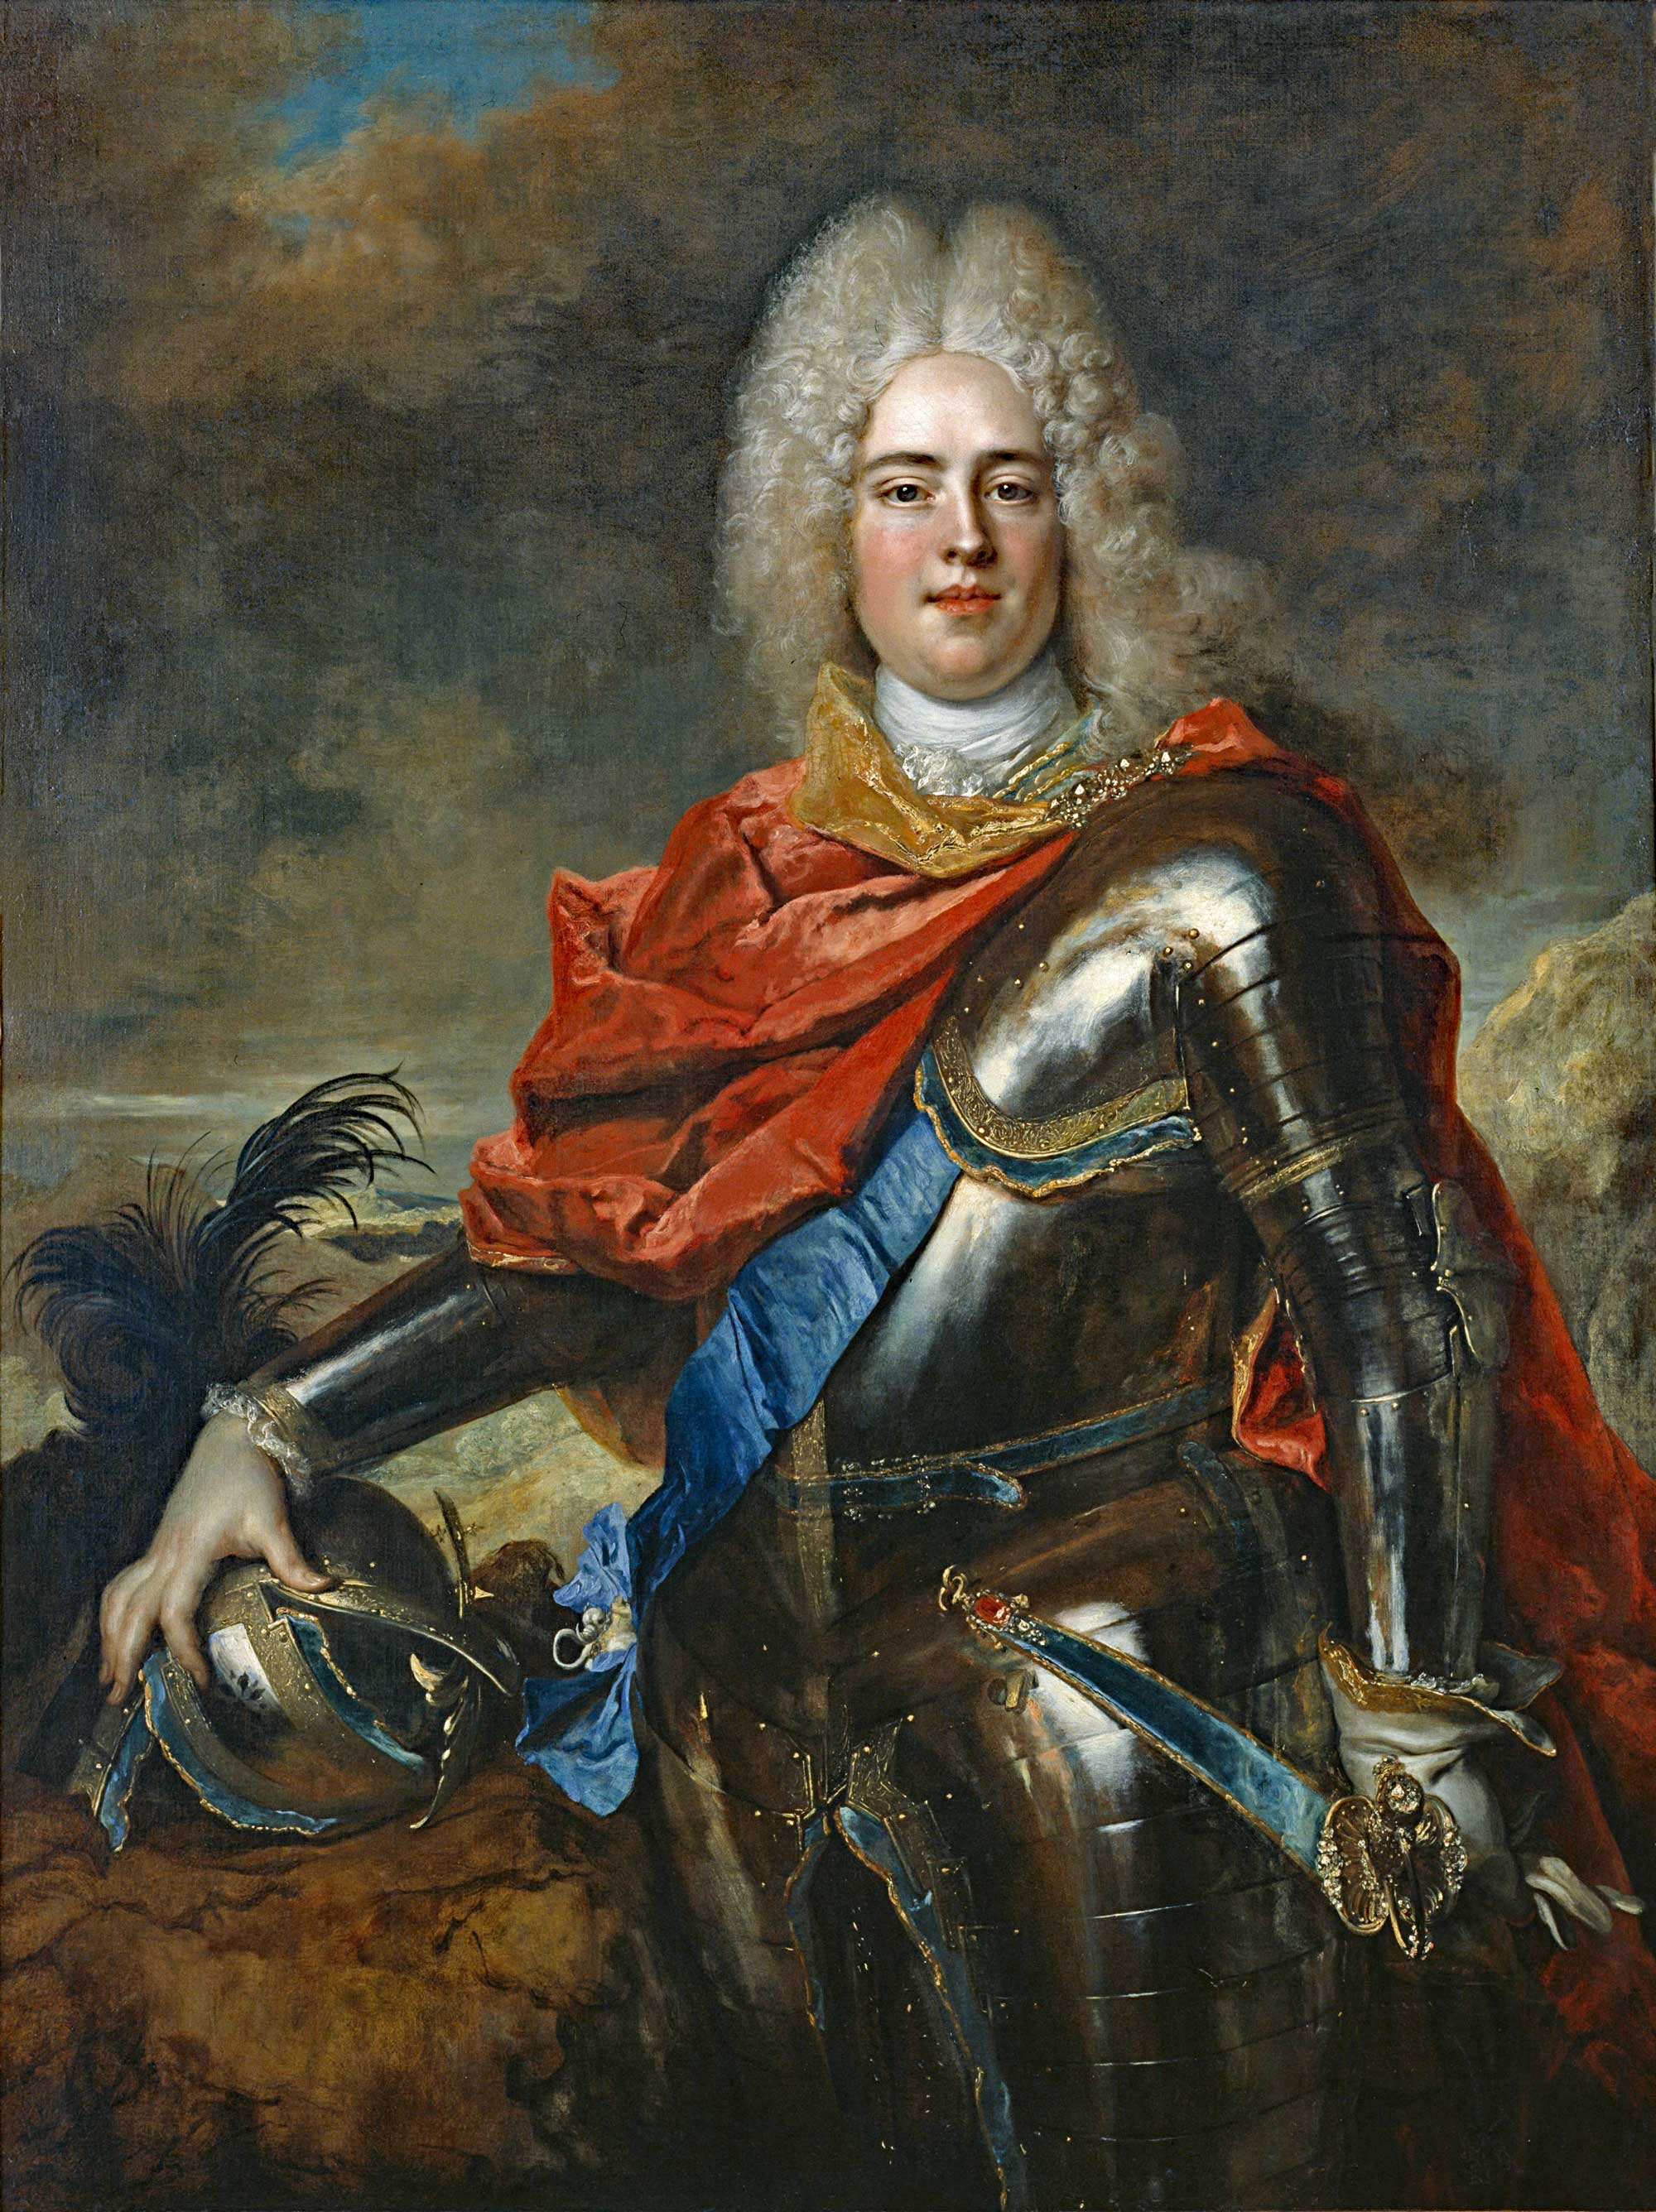 A portrait of Augustus III of Poland, aged 19, done in 1715 by the French painter Nicolas de Largillière.<br/>